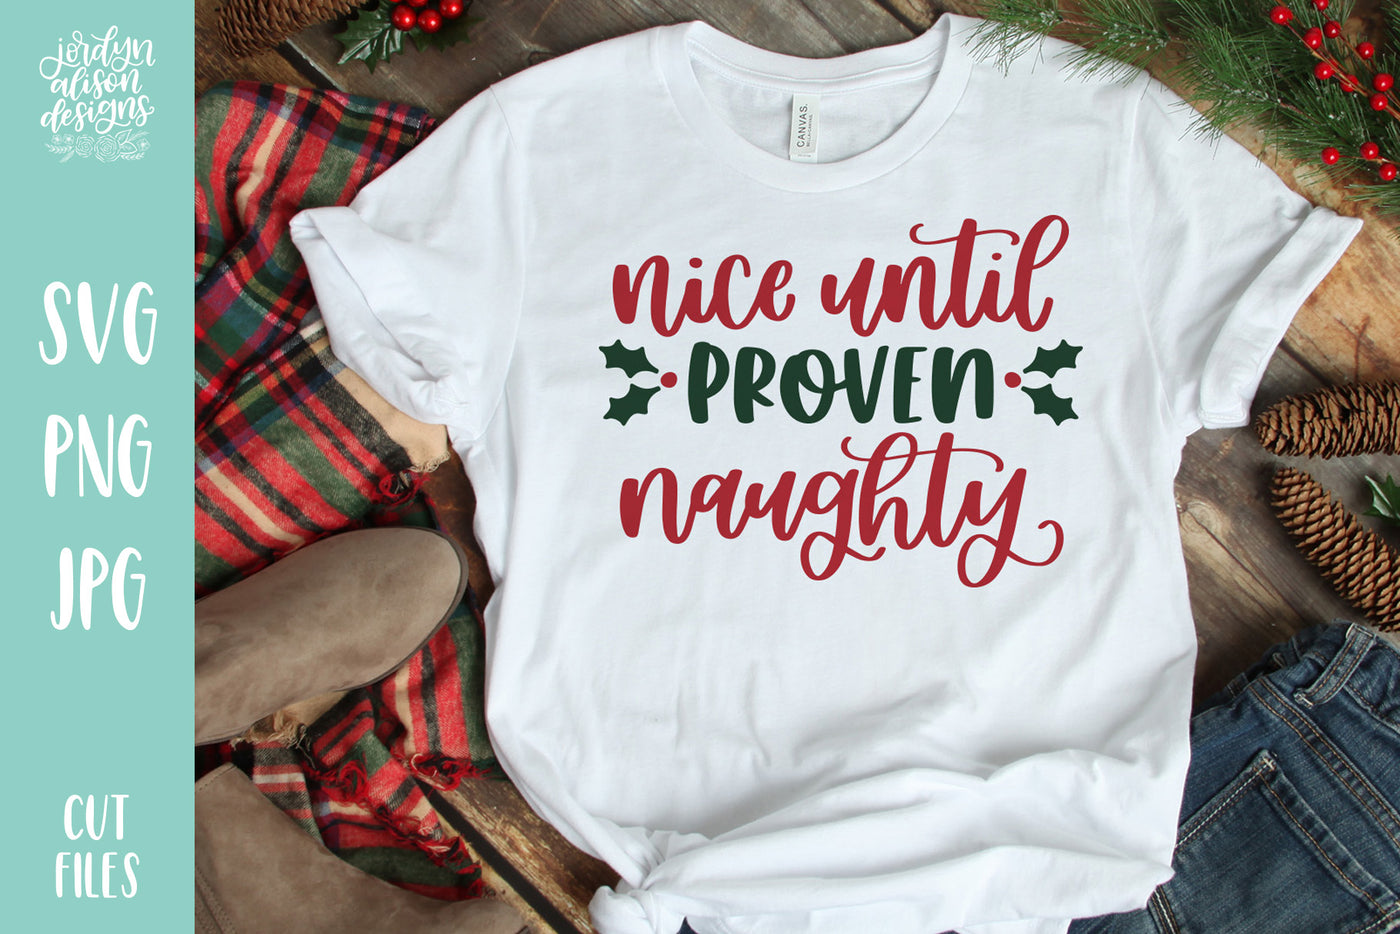 White T-shirt with handwritten text "Nice until Proven Naughty"